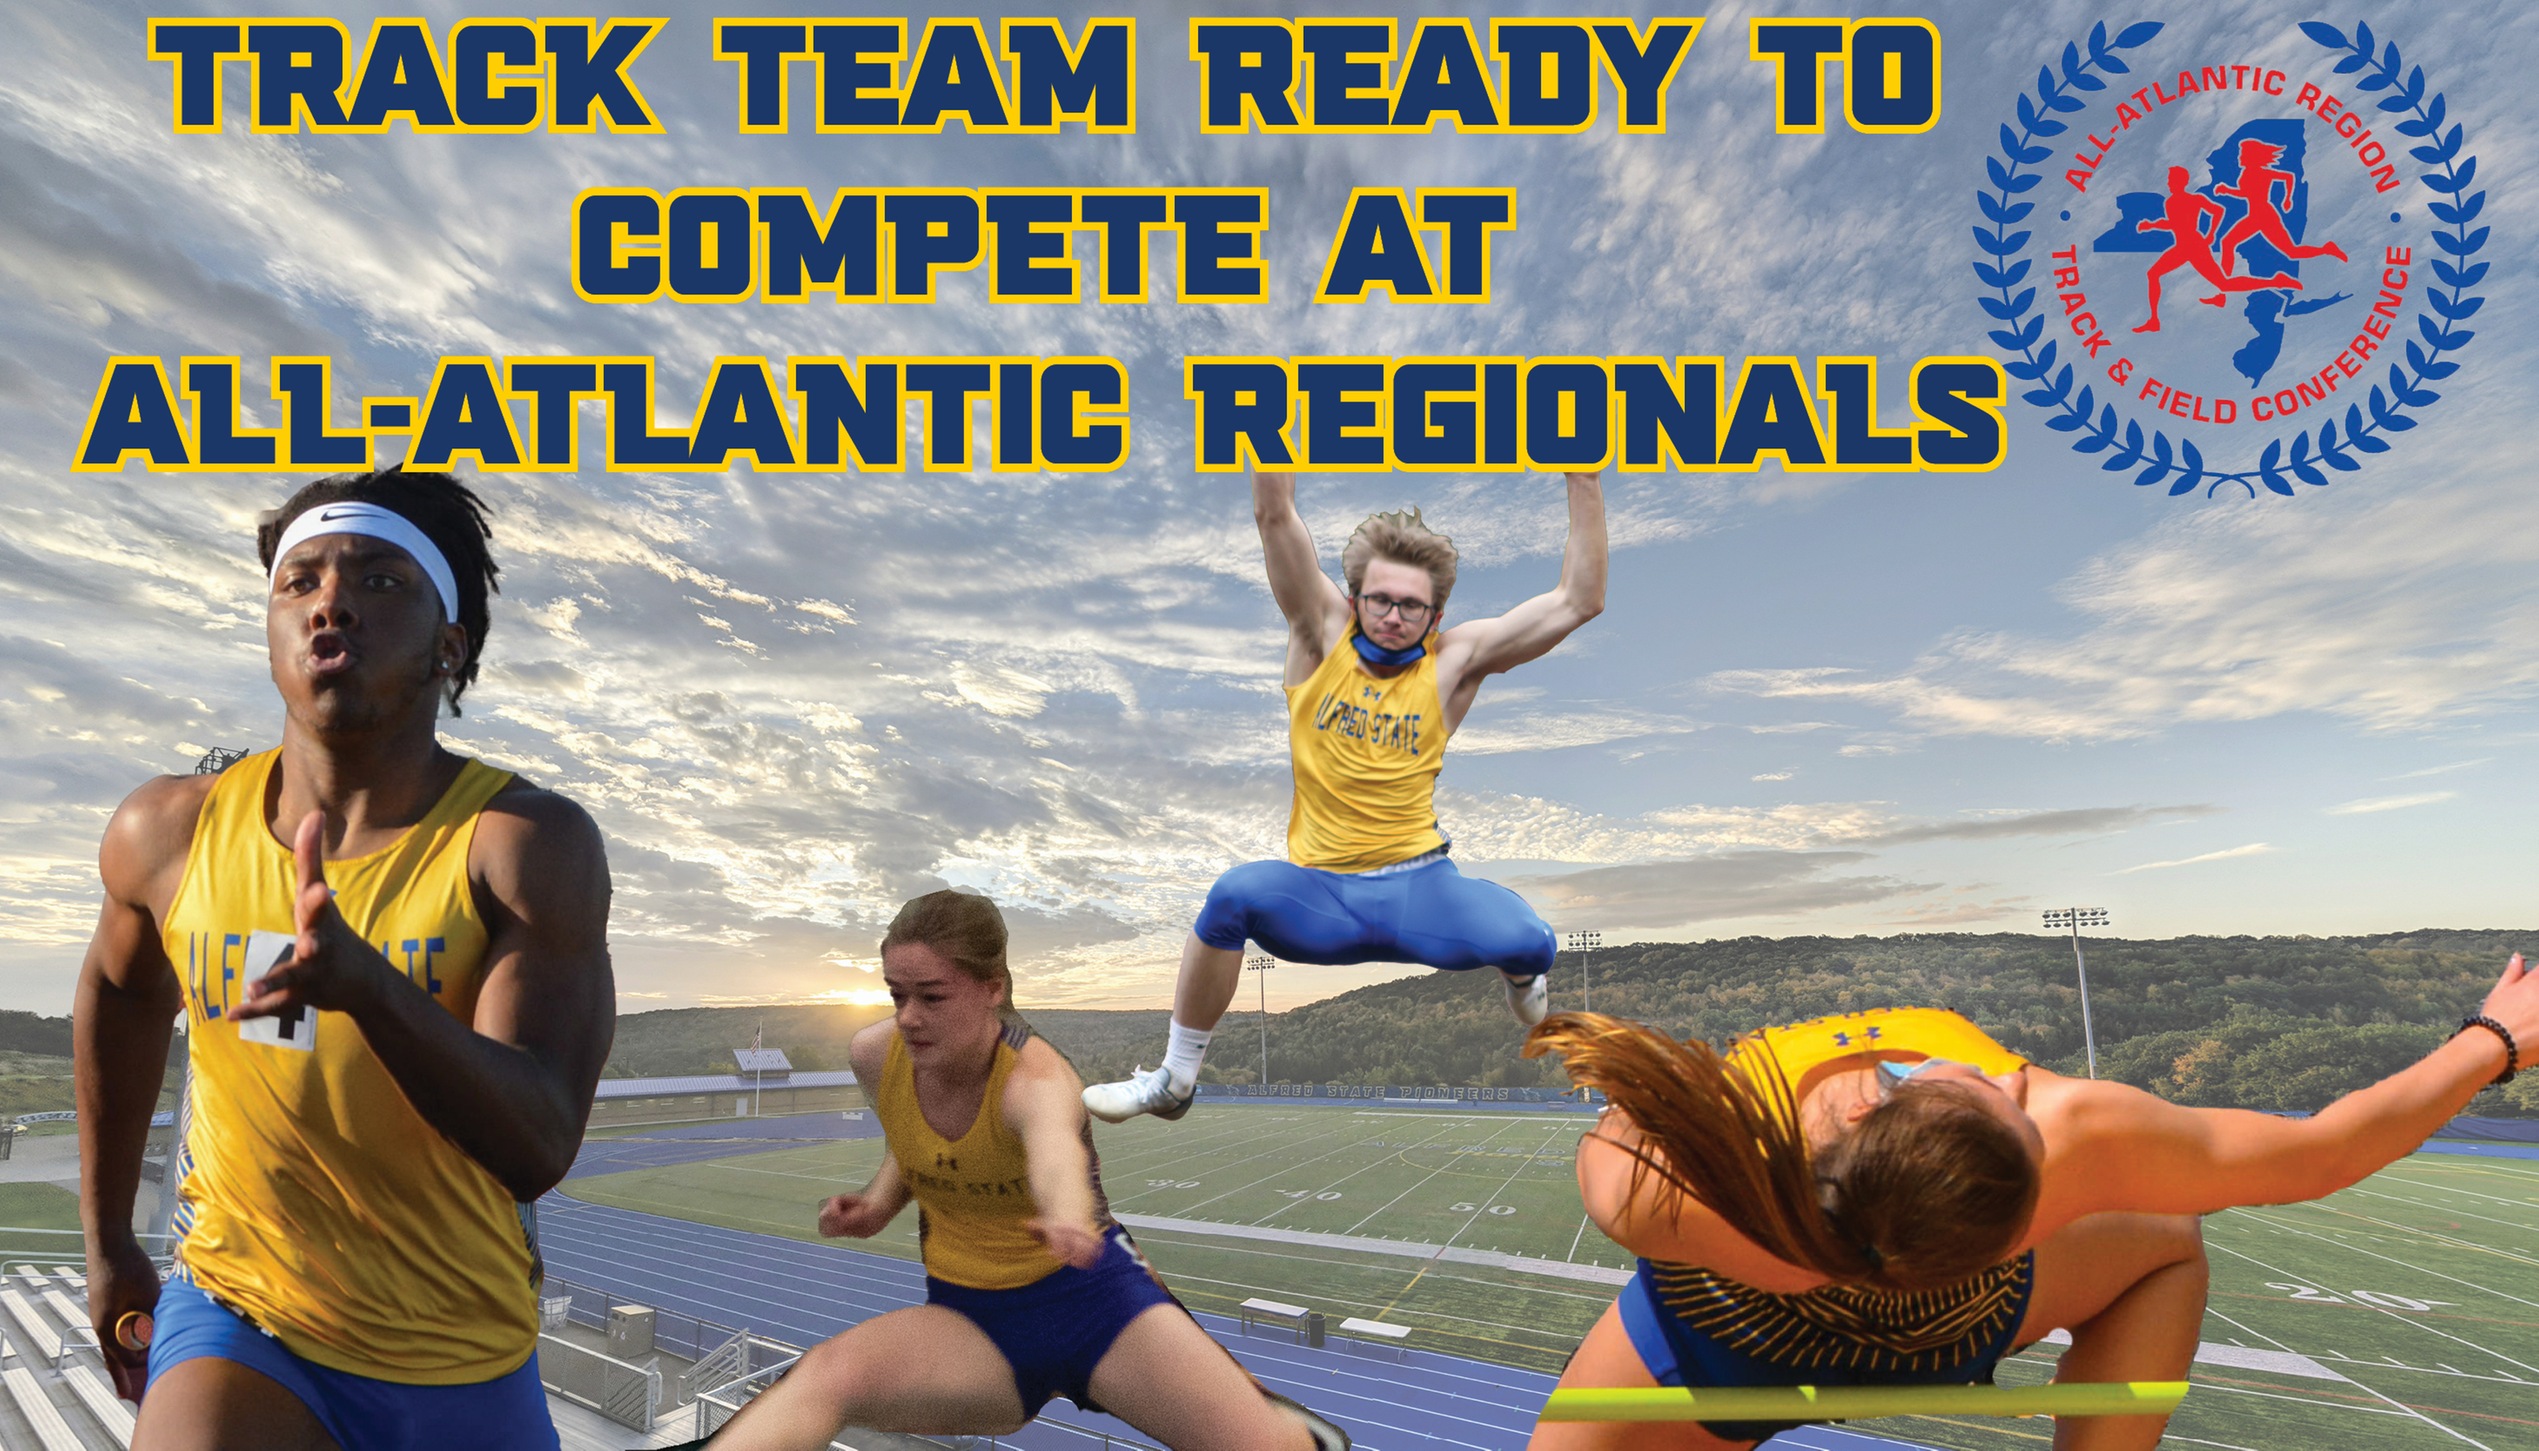 Alfred State ready for All-Atlantic Regionals

Pictured are Student-Athletes competing.